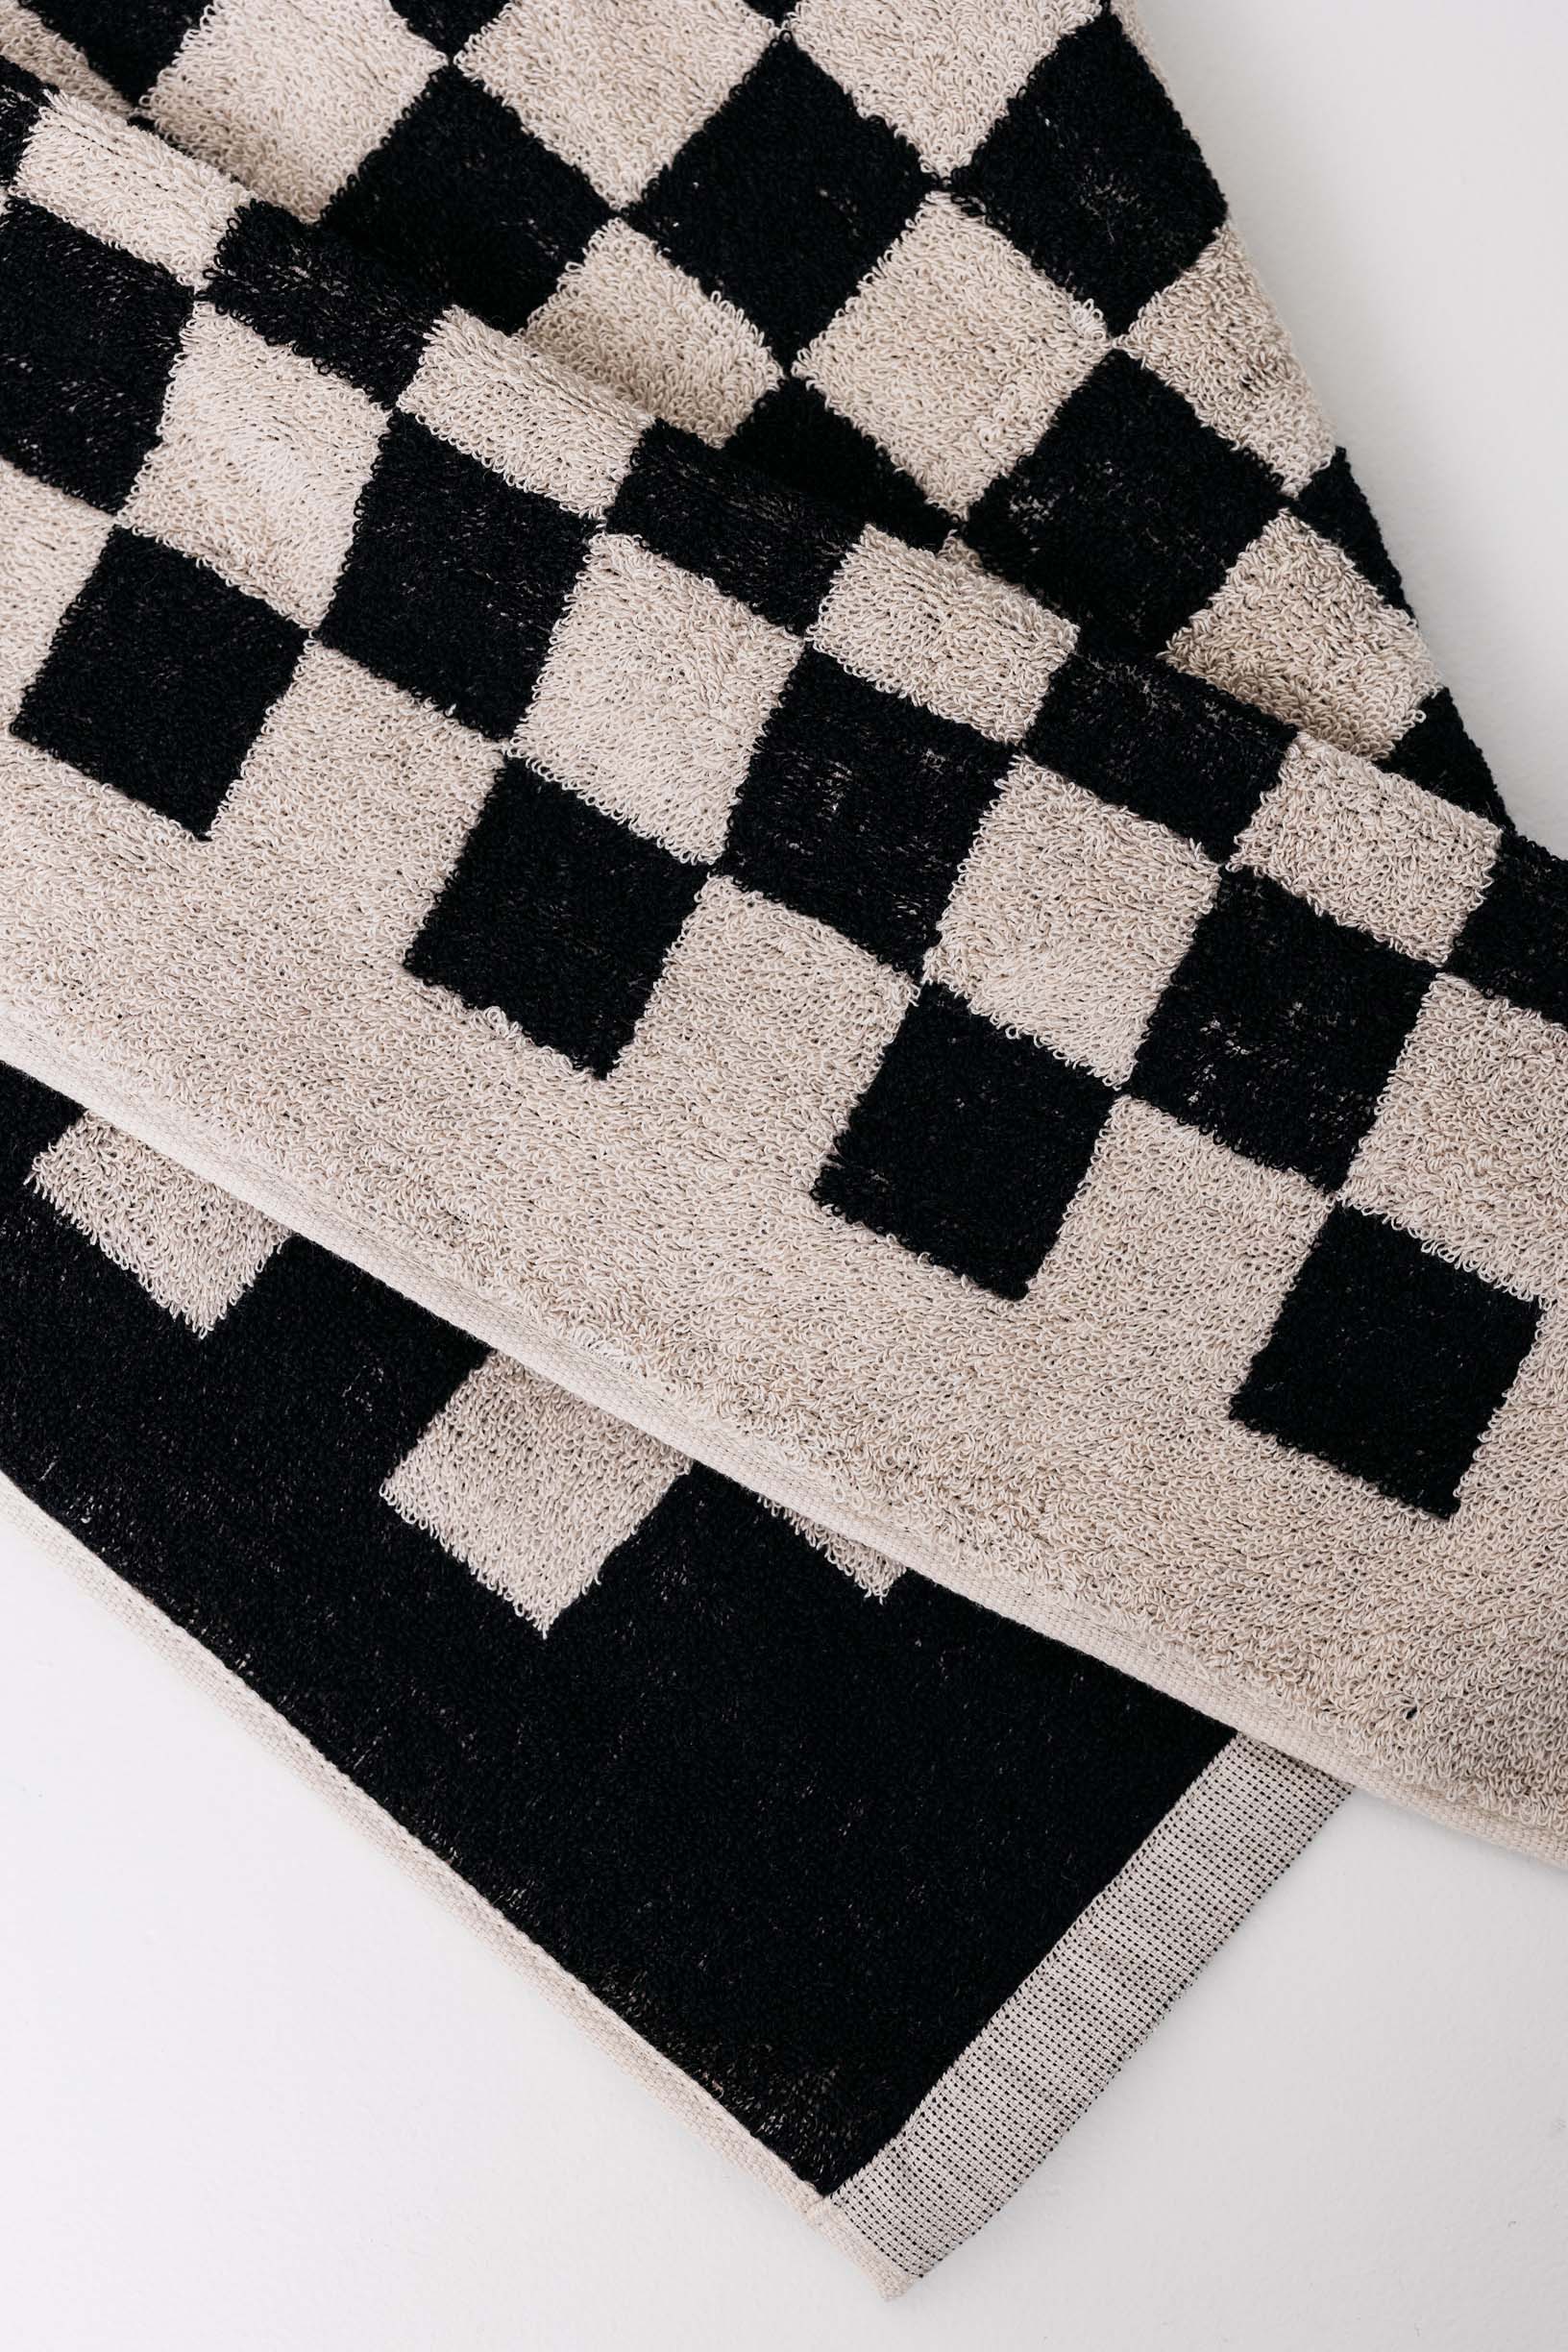 Black and Chocolate Brown Checkerboard Hand & Bath Towel by